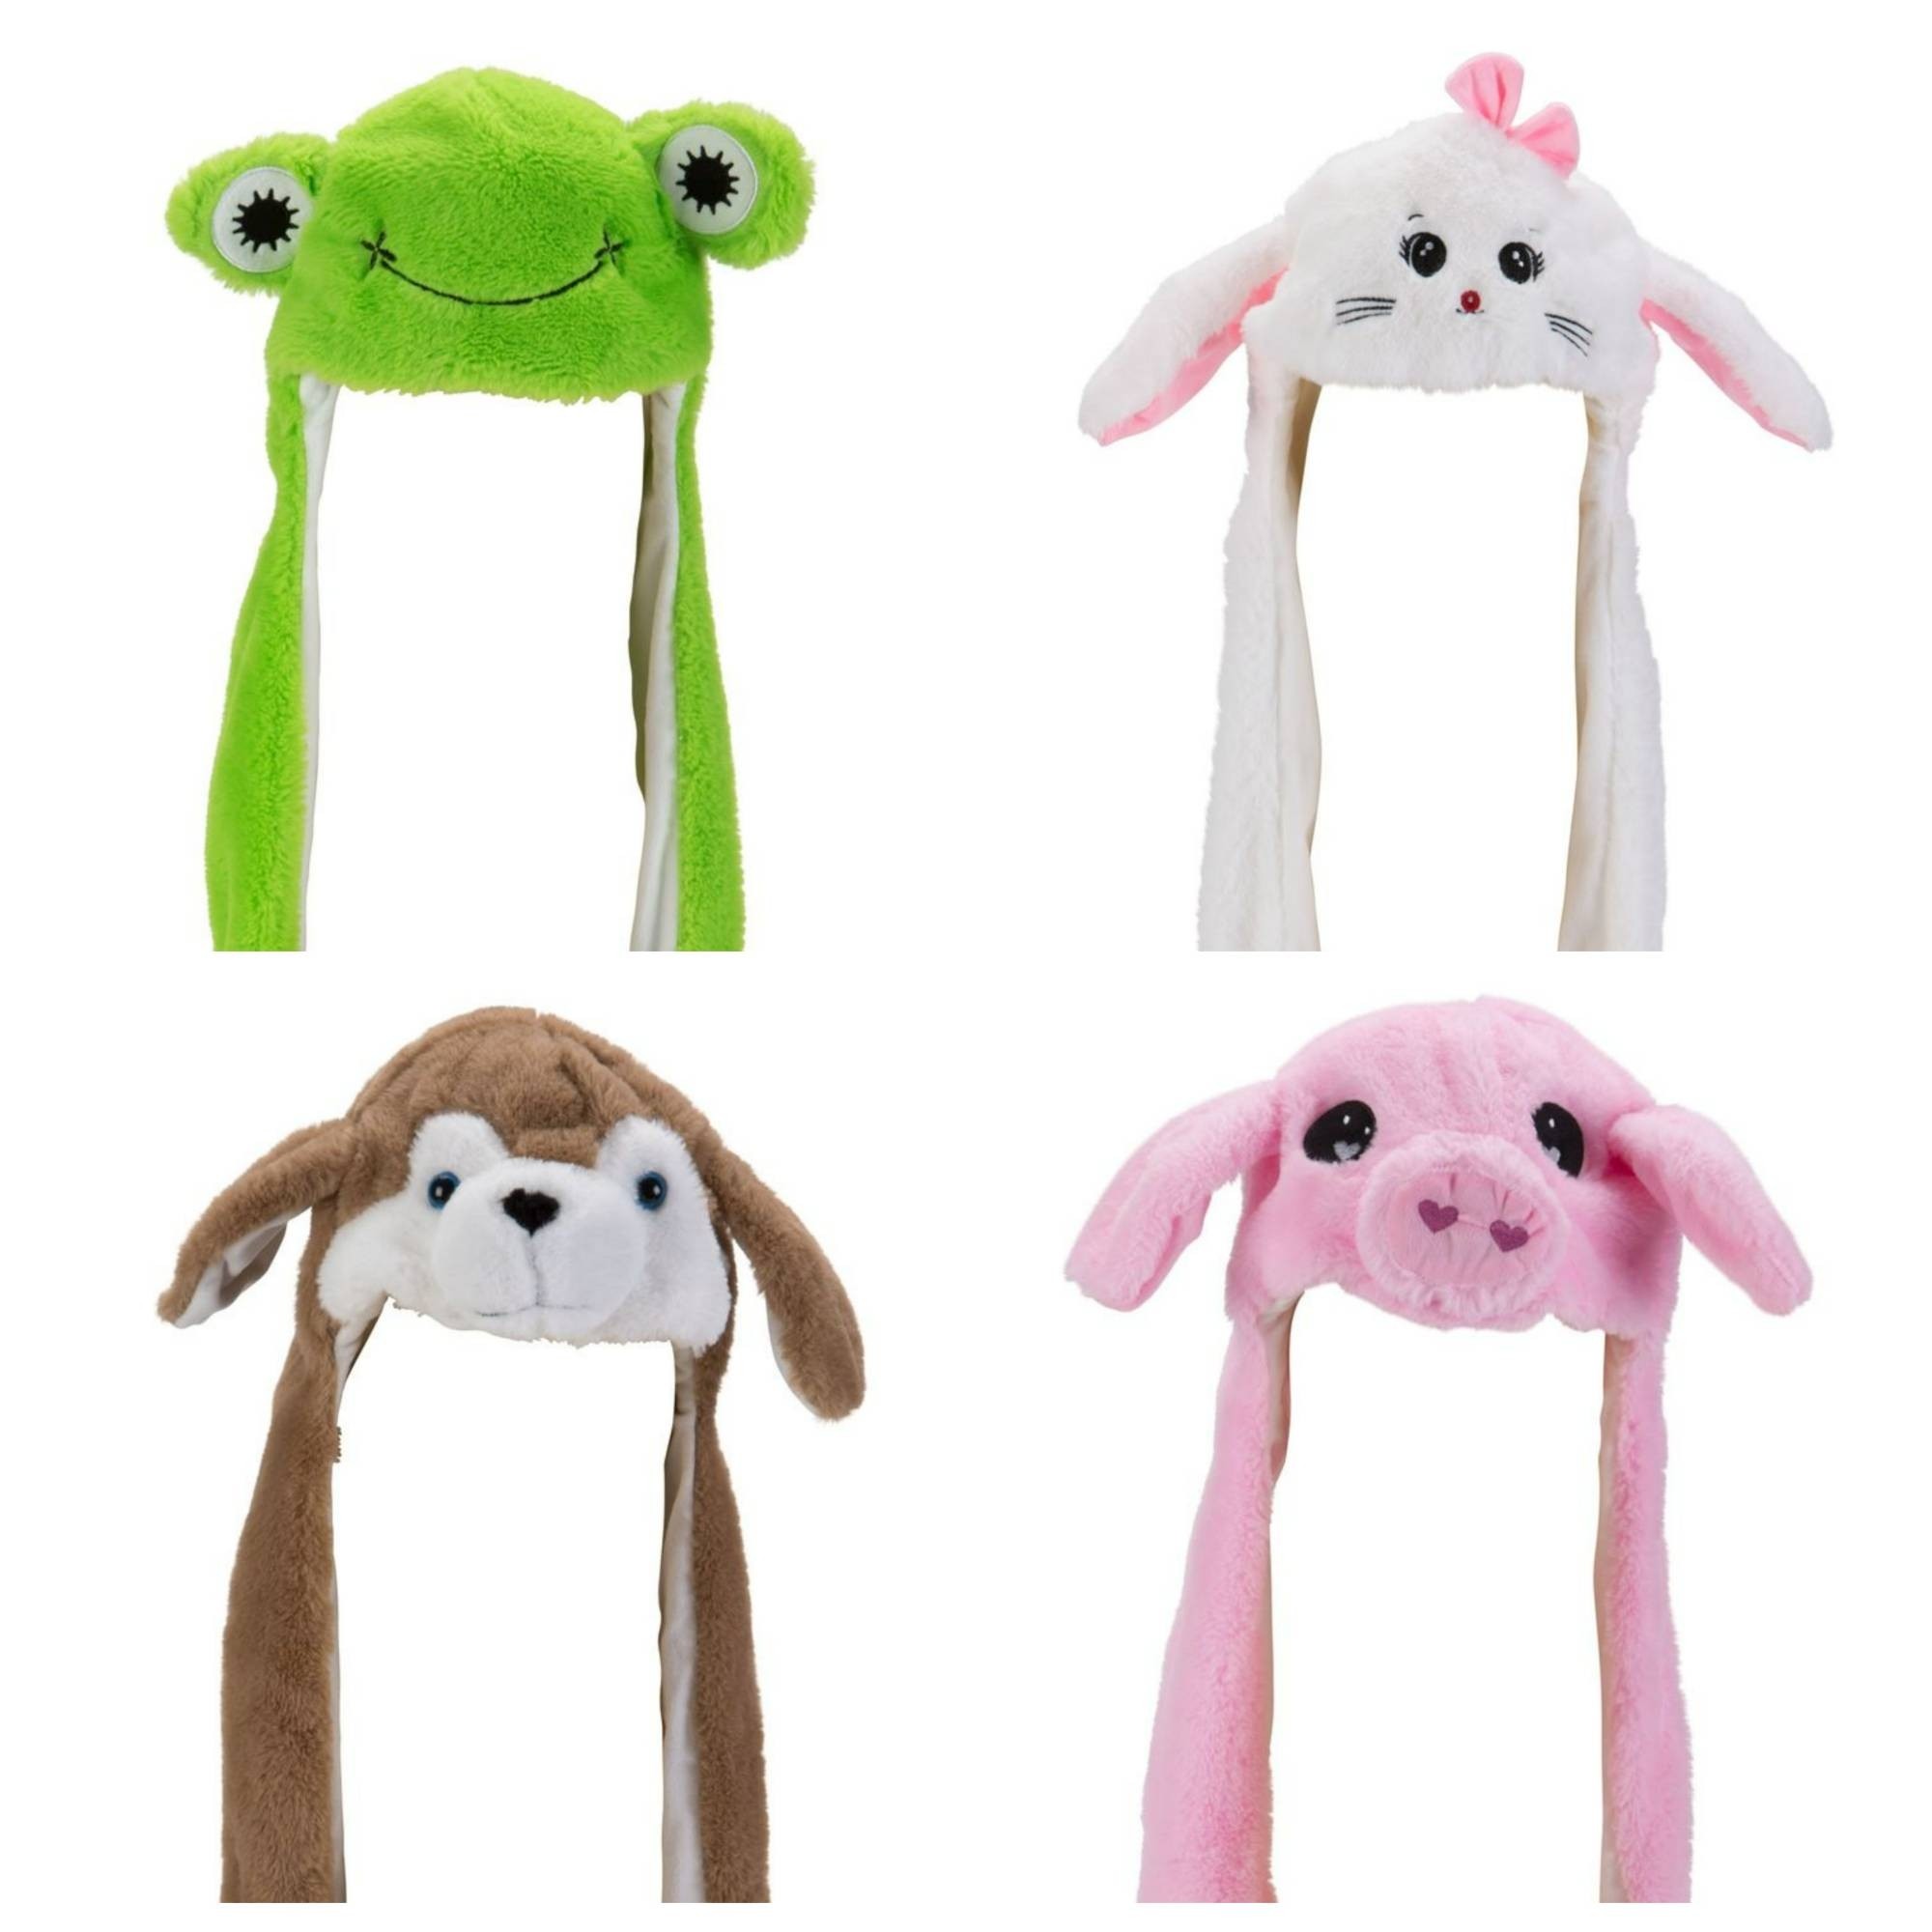 Animal Hats with Moving Ears Assortment